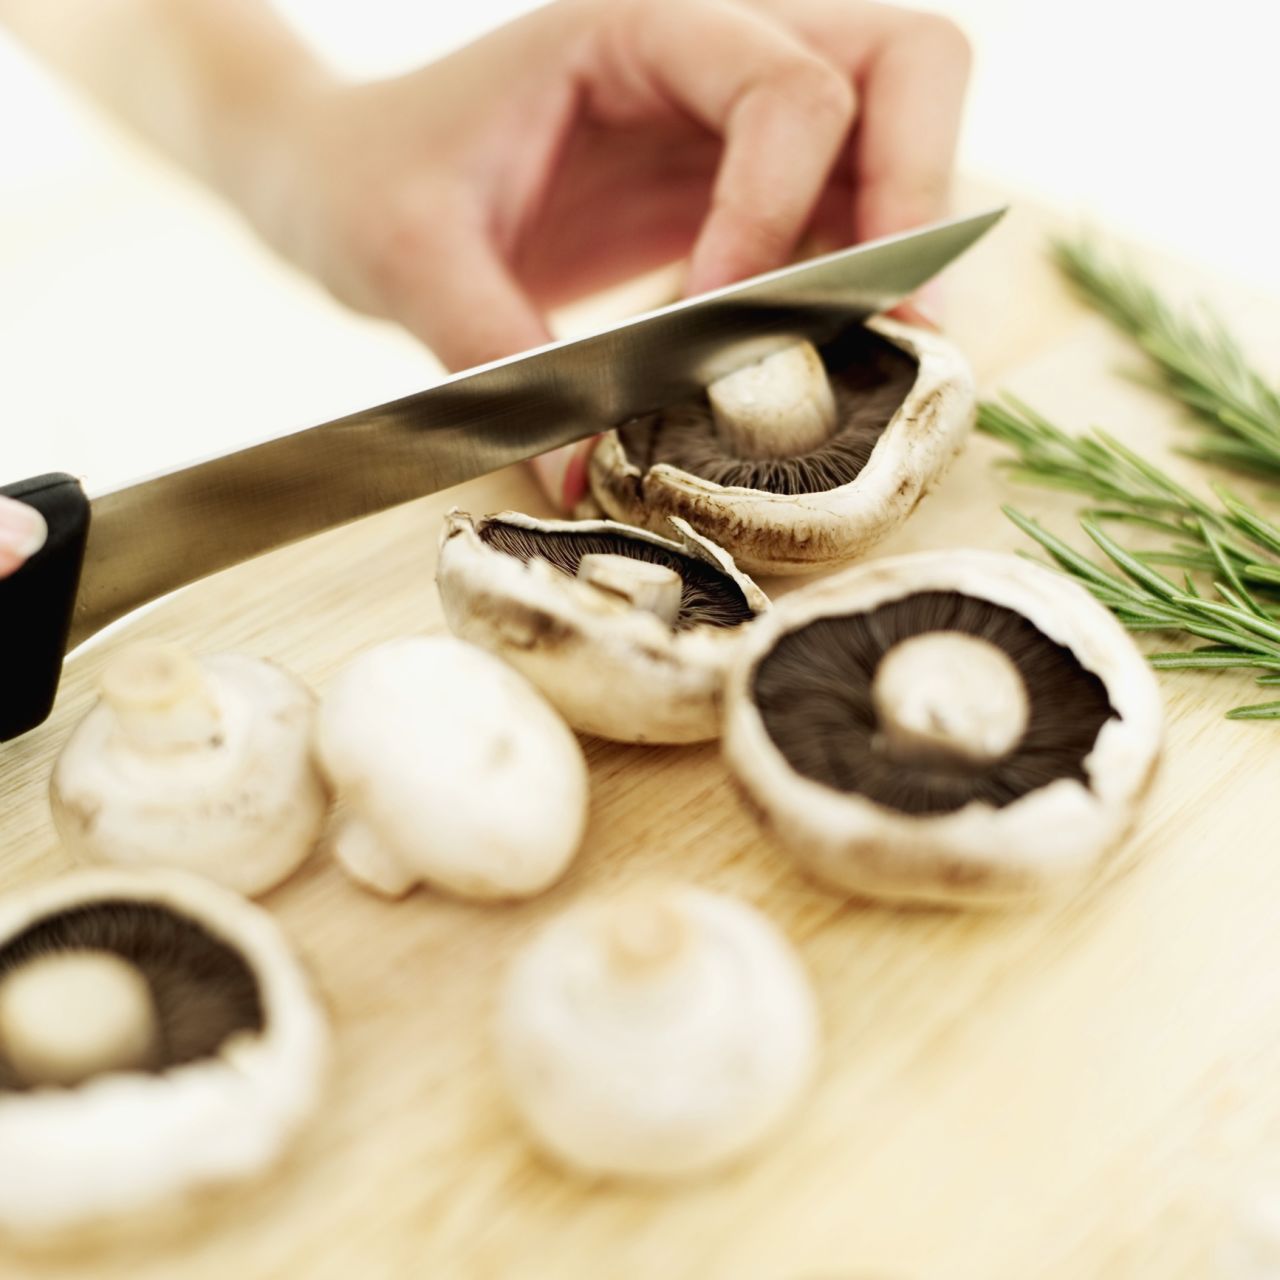 Mushrooms have been found to be high in potassium, B vitamins and antioxidants such as ergothioneine, says Joy Dubost, spokeswoman for the US Academy of Nutrition and Dietetics.